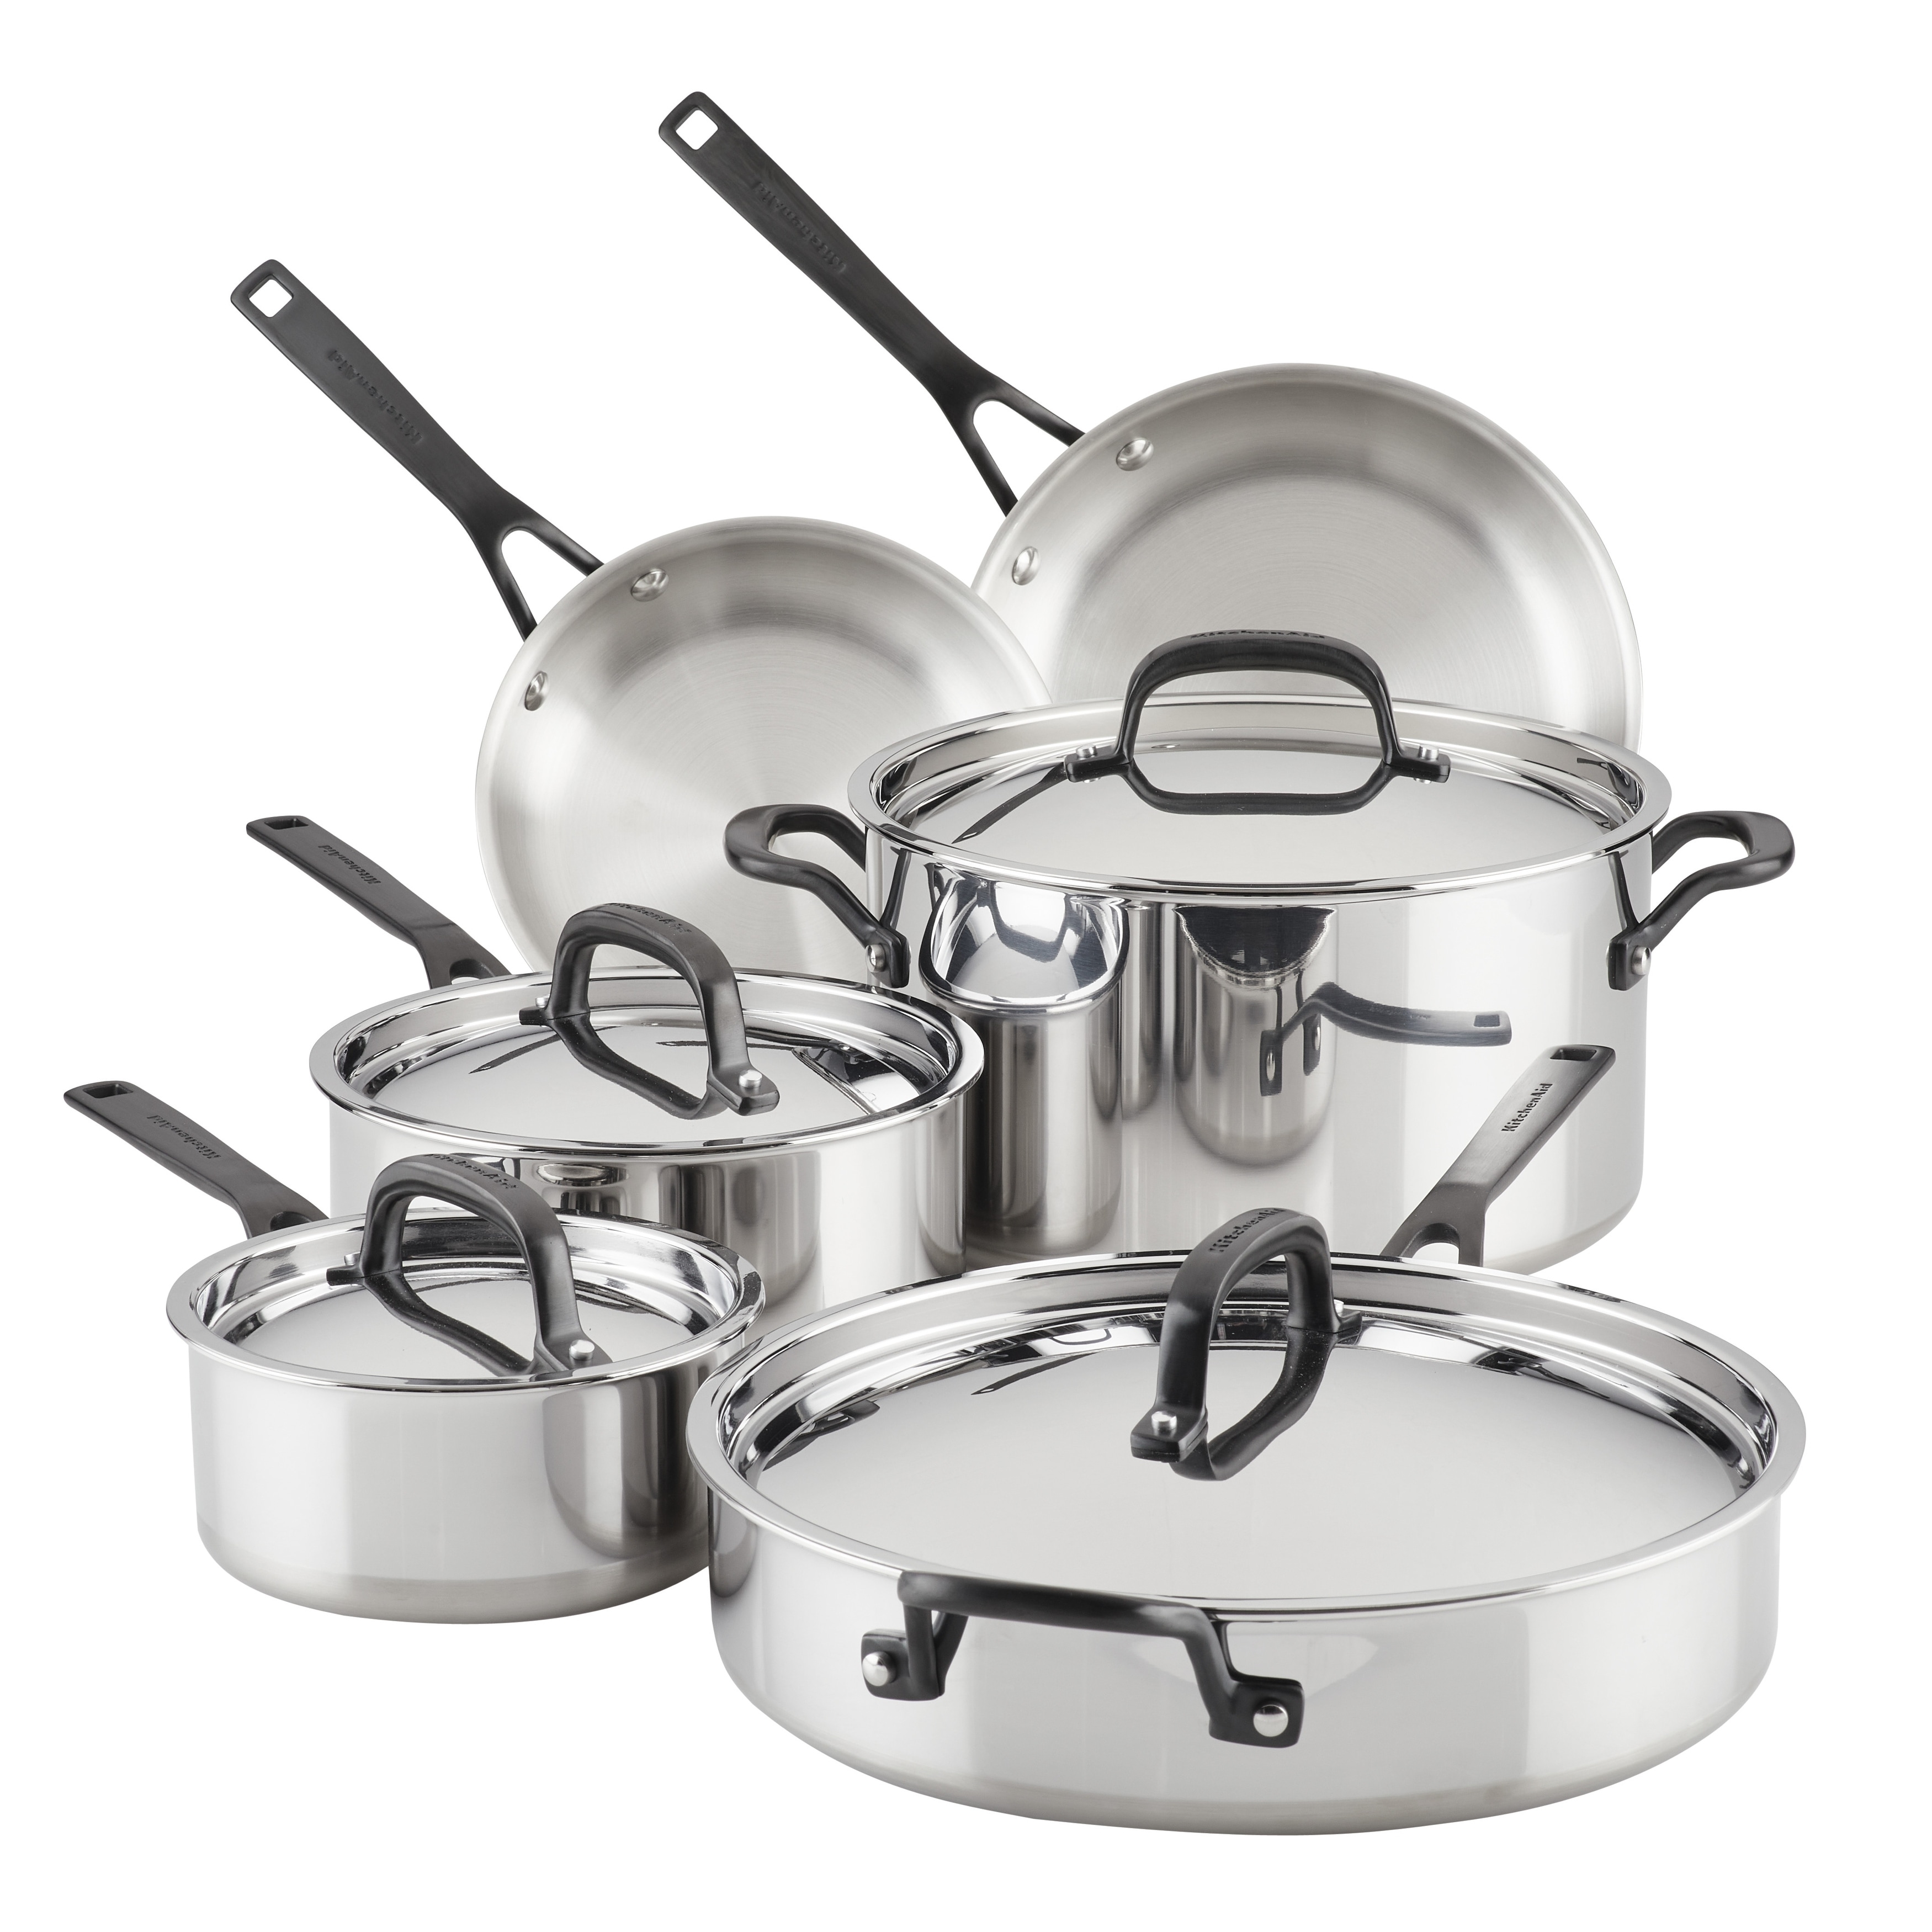  KitchenAid Stainless Steel Cookware/Pots and Pans Set, 10  Piece, Brushed Stainless Steel: Home & Kitchen